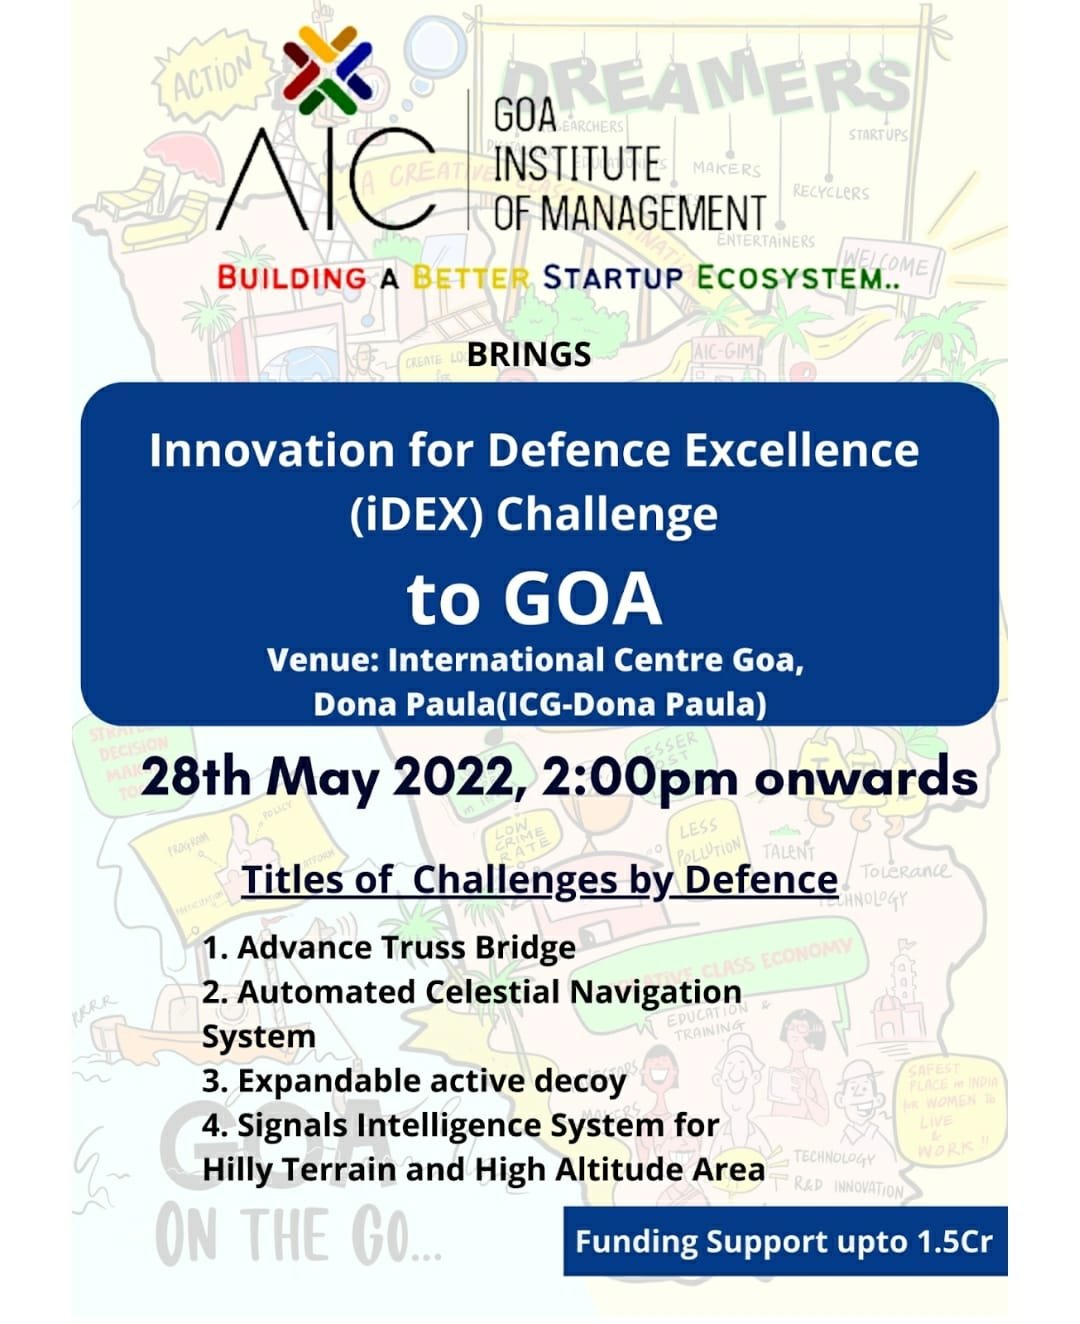 Atal Incubation Centre and Goa Institute of Management (AICGIM) brings Innovation for Defence Excellence(iDEX) Challenge to Goa (1)